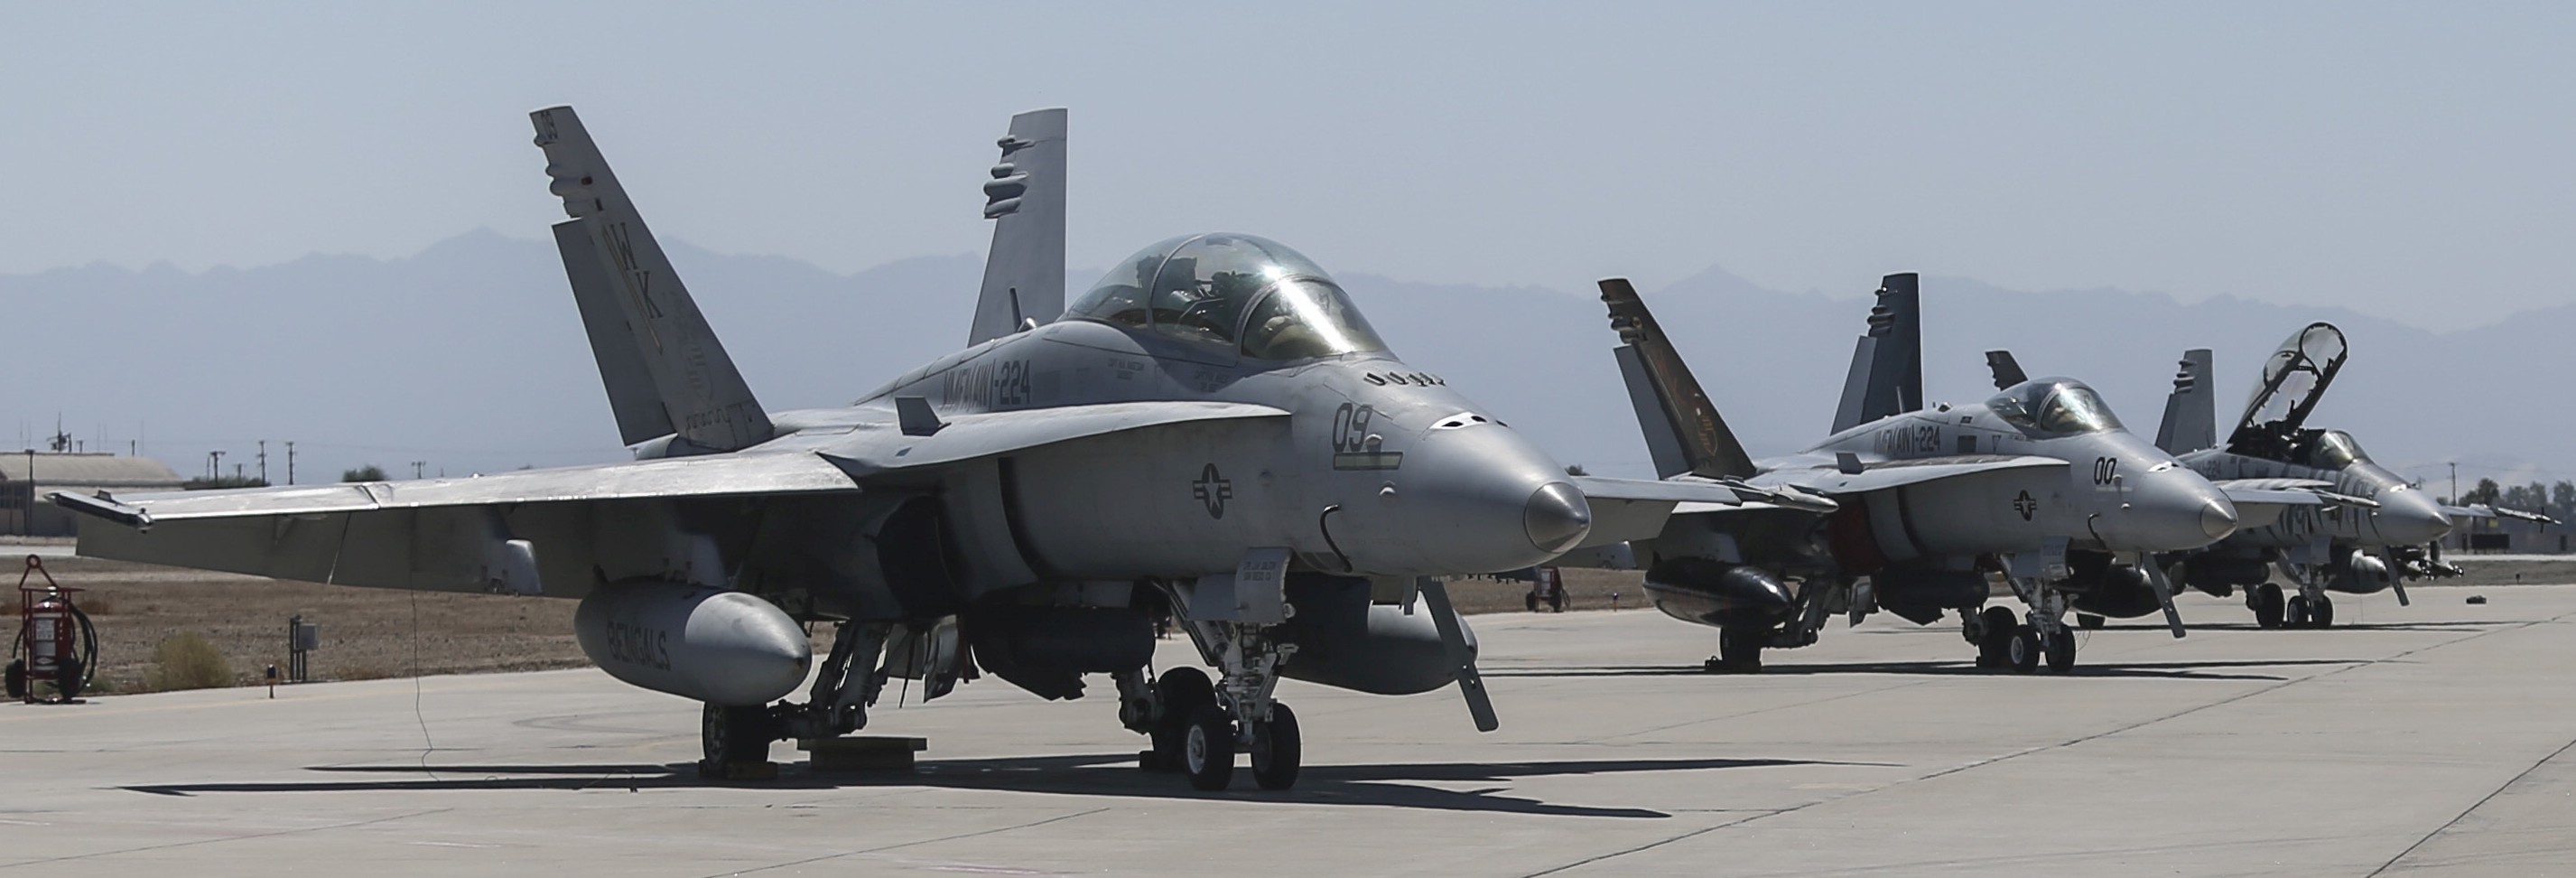 vmfa(aw)-224 bengals marine fighter attack squadron usmc f/a-18d hornet 96